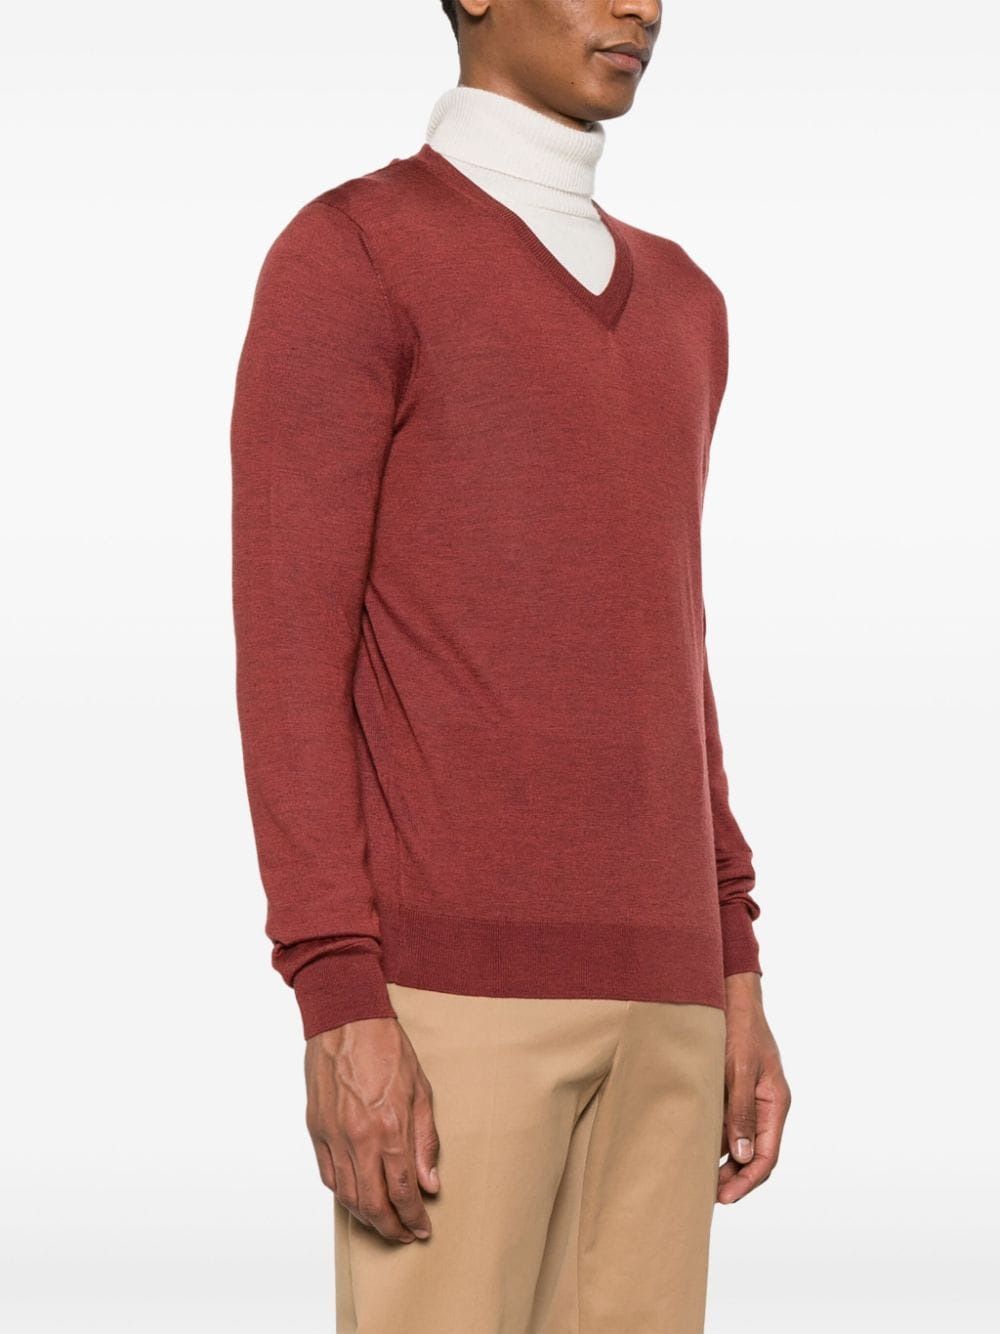 Shop Colombo Luxurious V-neck Sweater For Men In Maroon